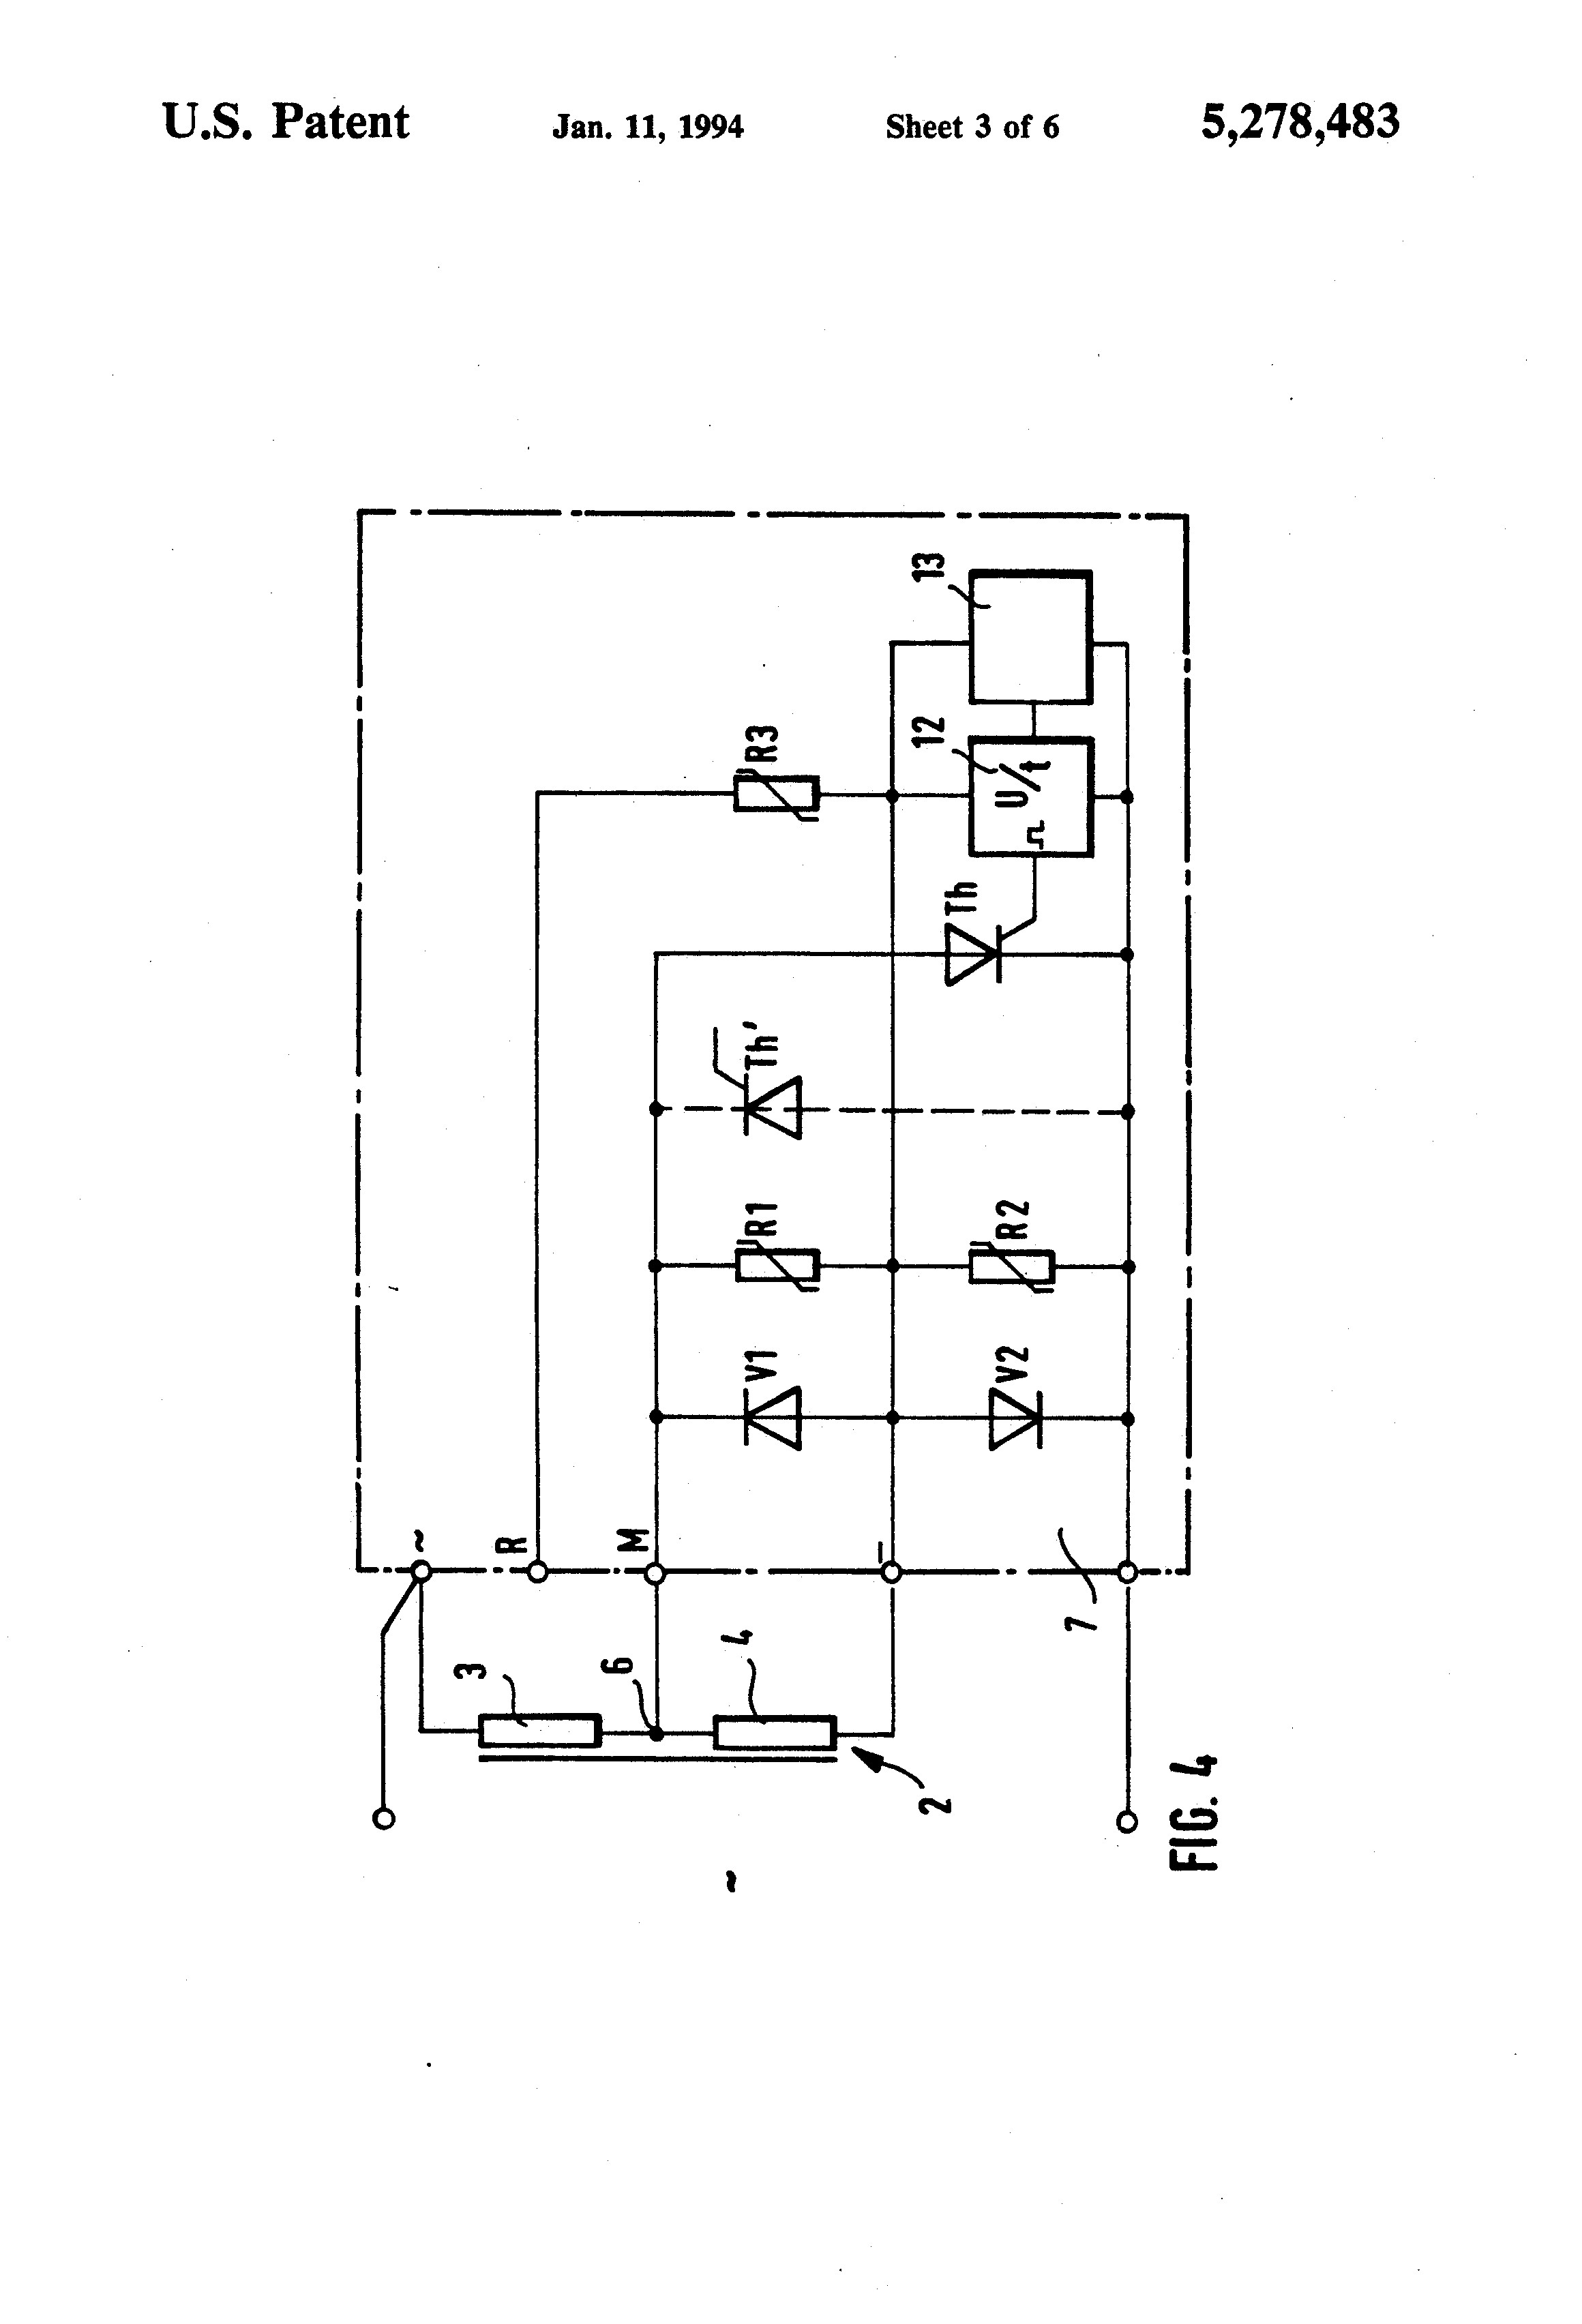 Patent Us Motor Brake With Single Free Wheeling Diode Drawing 3 phase 6 lead motor Mechanical Electrical